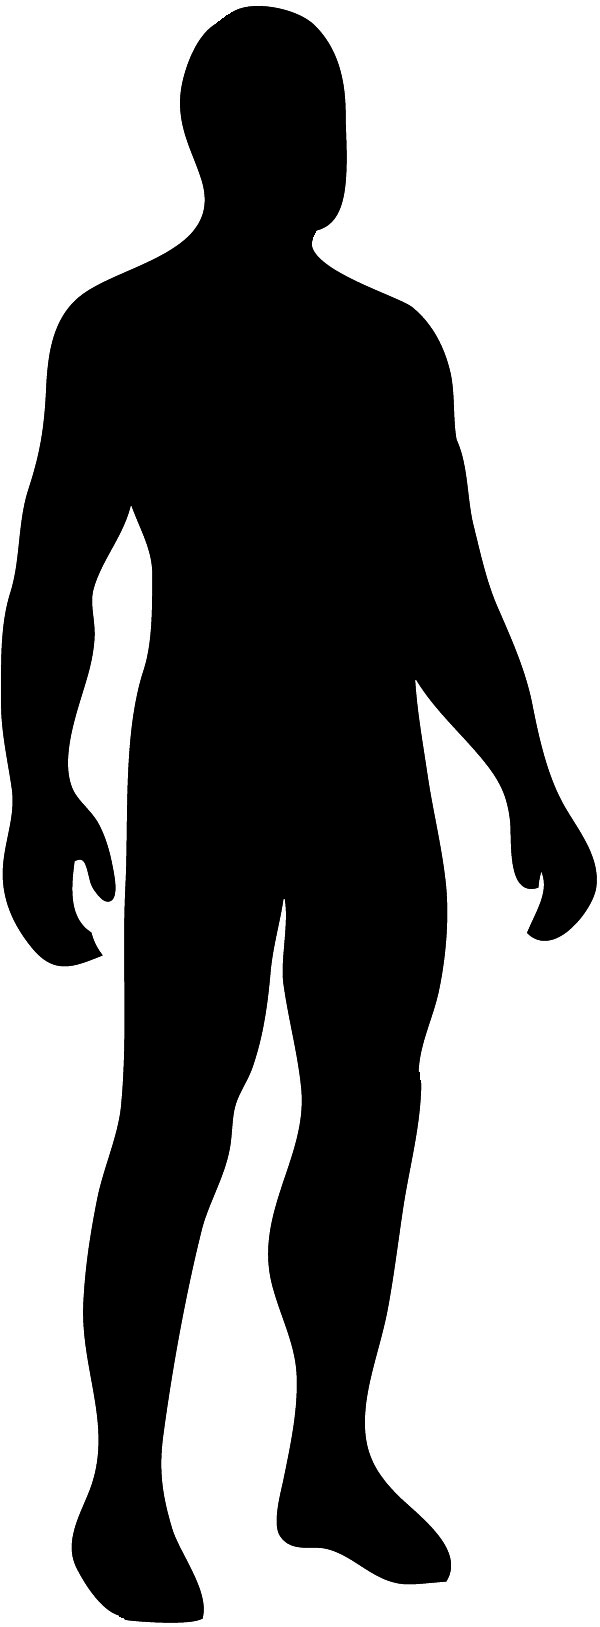 Images For > Male Silhouette Head Png